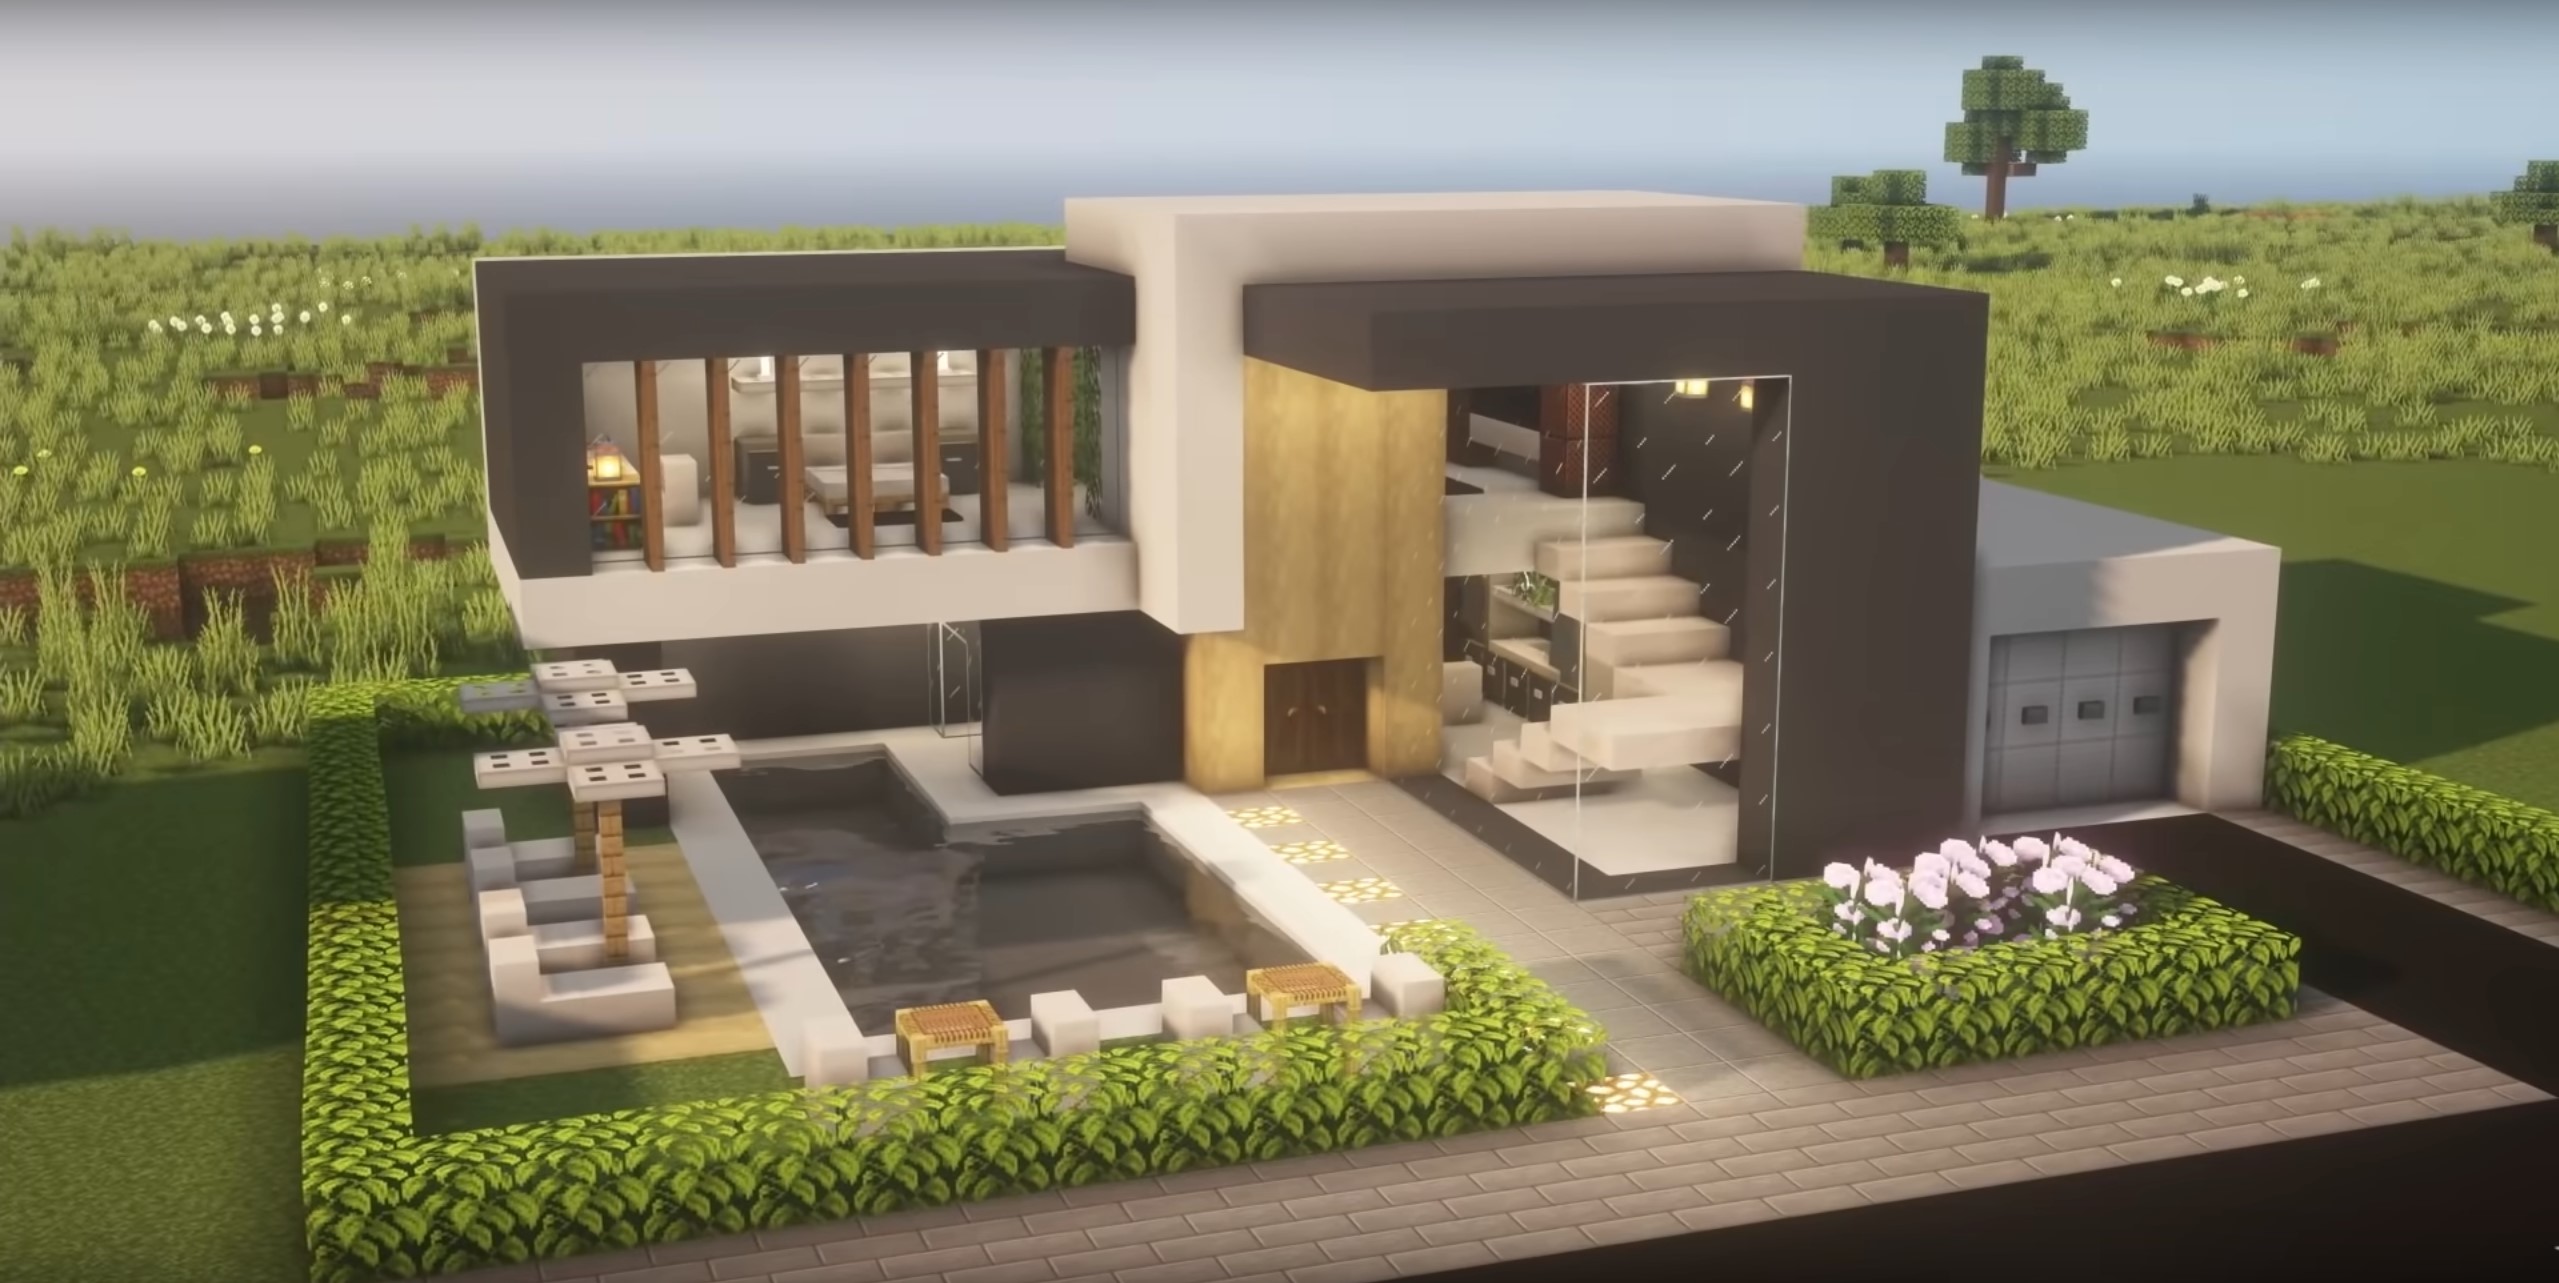 Luxury modern house with pool and garage minecraft building idea